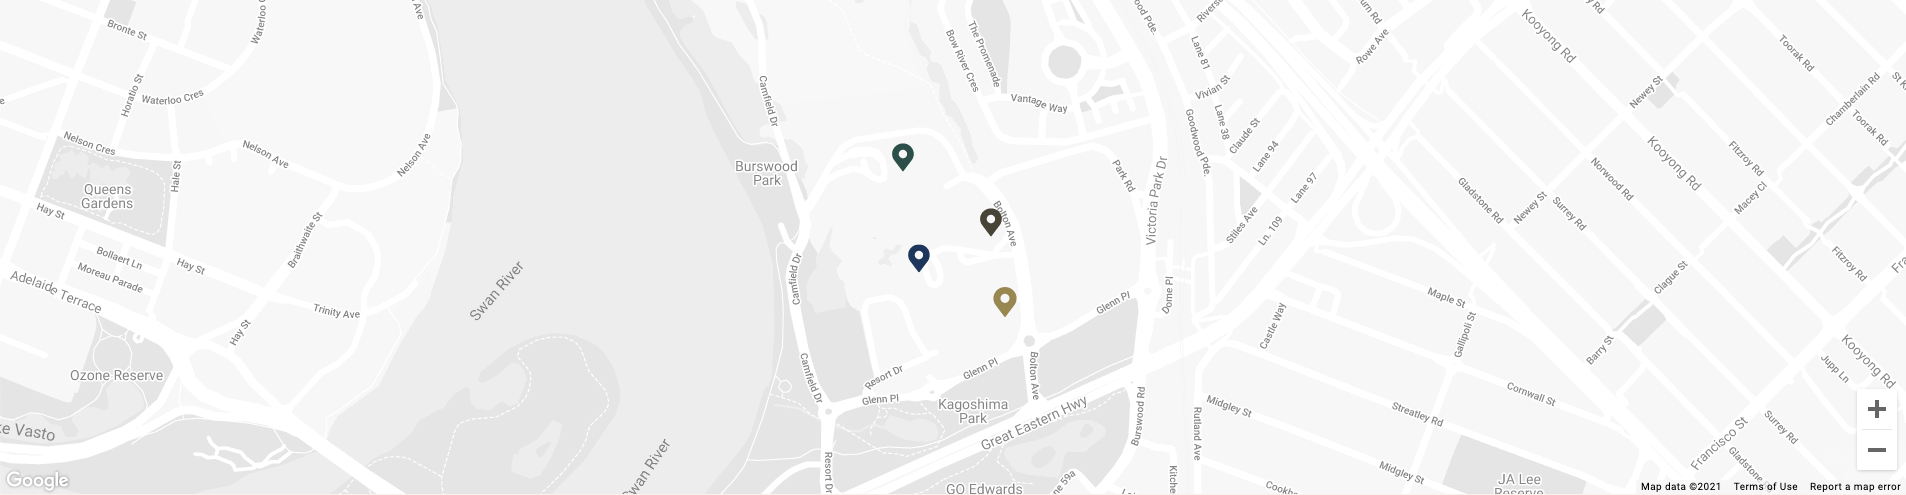 Map image of Crown Sports Bar